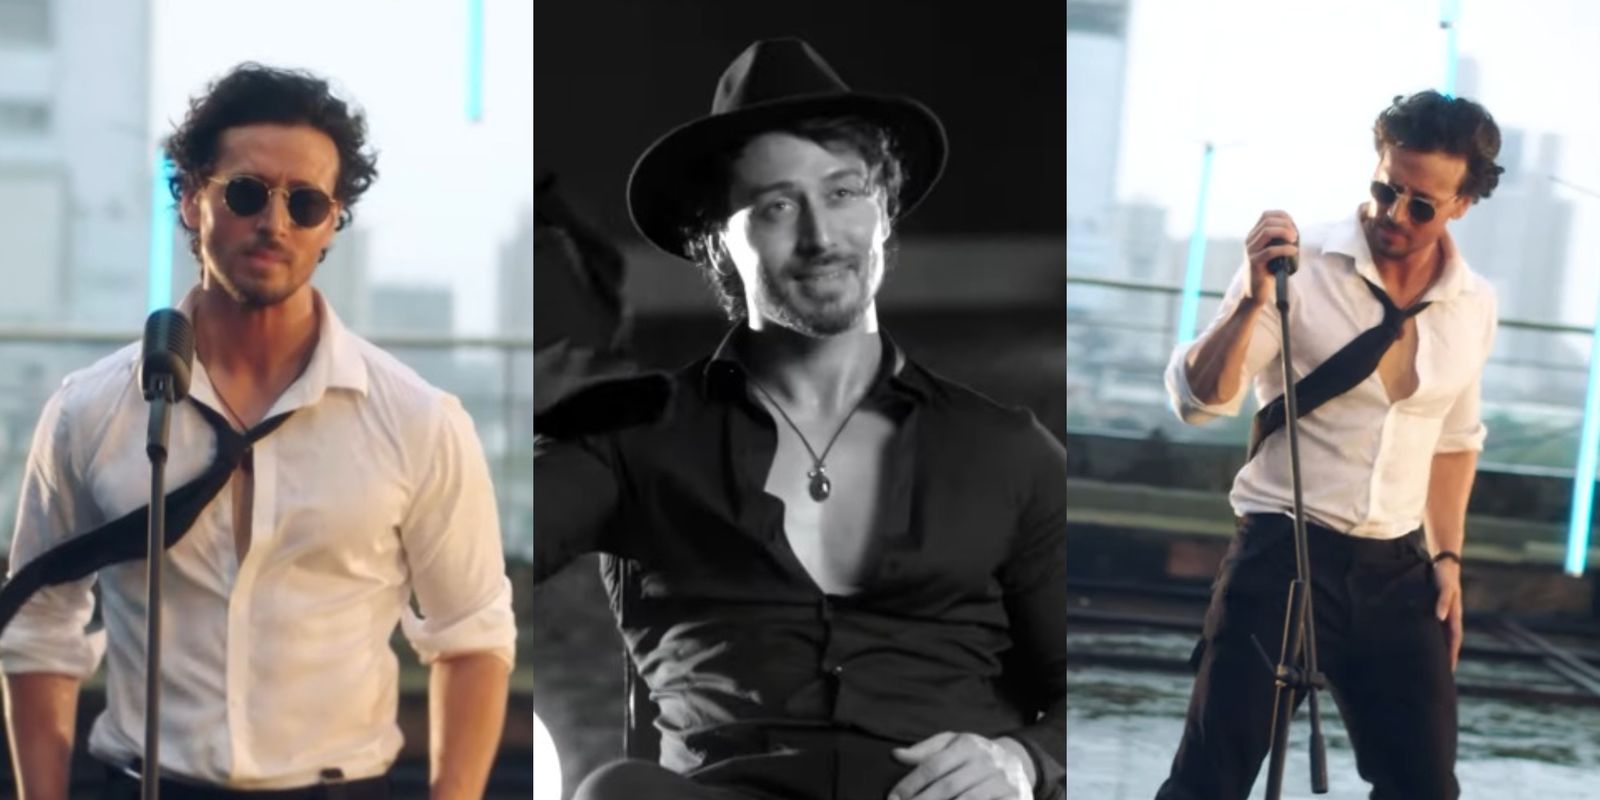 Tiger Shroff’s Unbelievable Music Video: The Actor’s Angelic Voice And Killer Moves Are An Absolute Delight; Watch